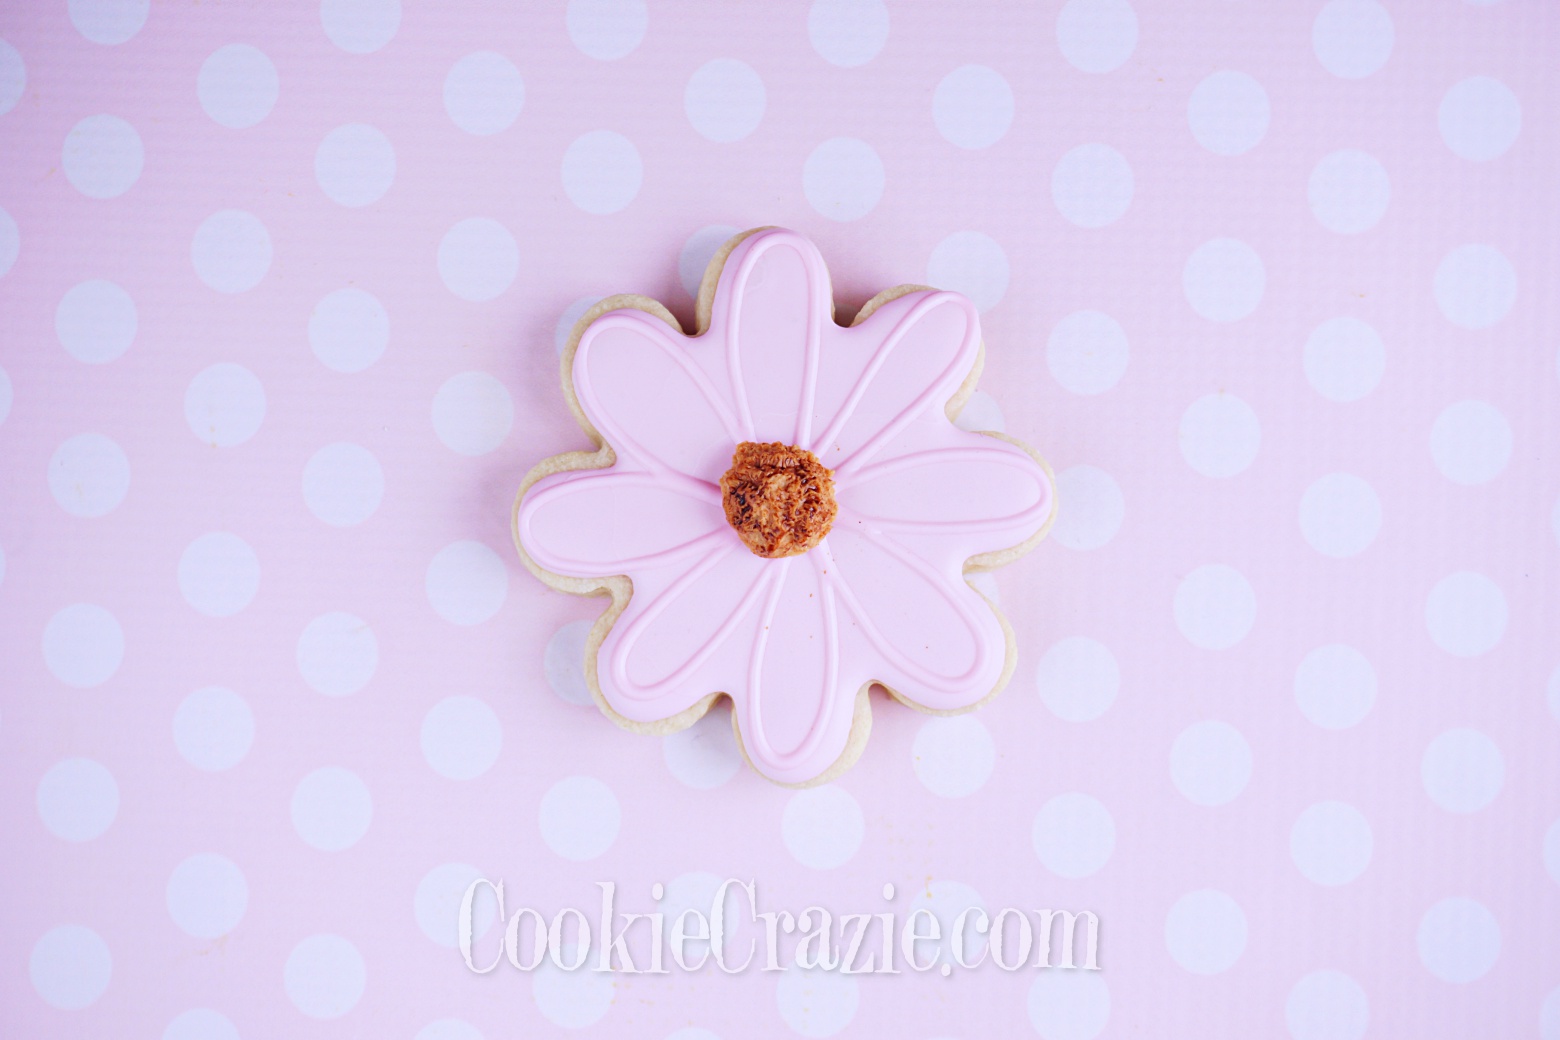  Pink Flower Decorated Sugar Cookie YouTube video  HERE  